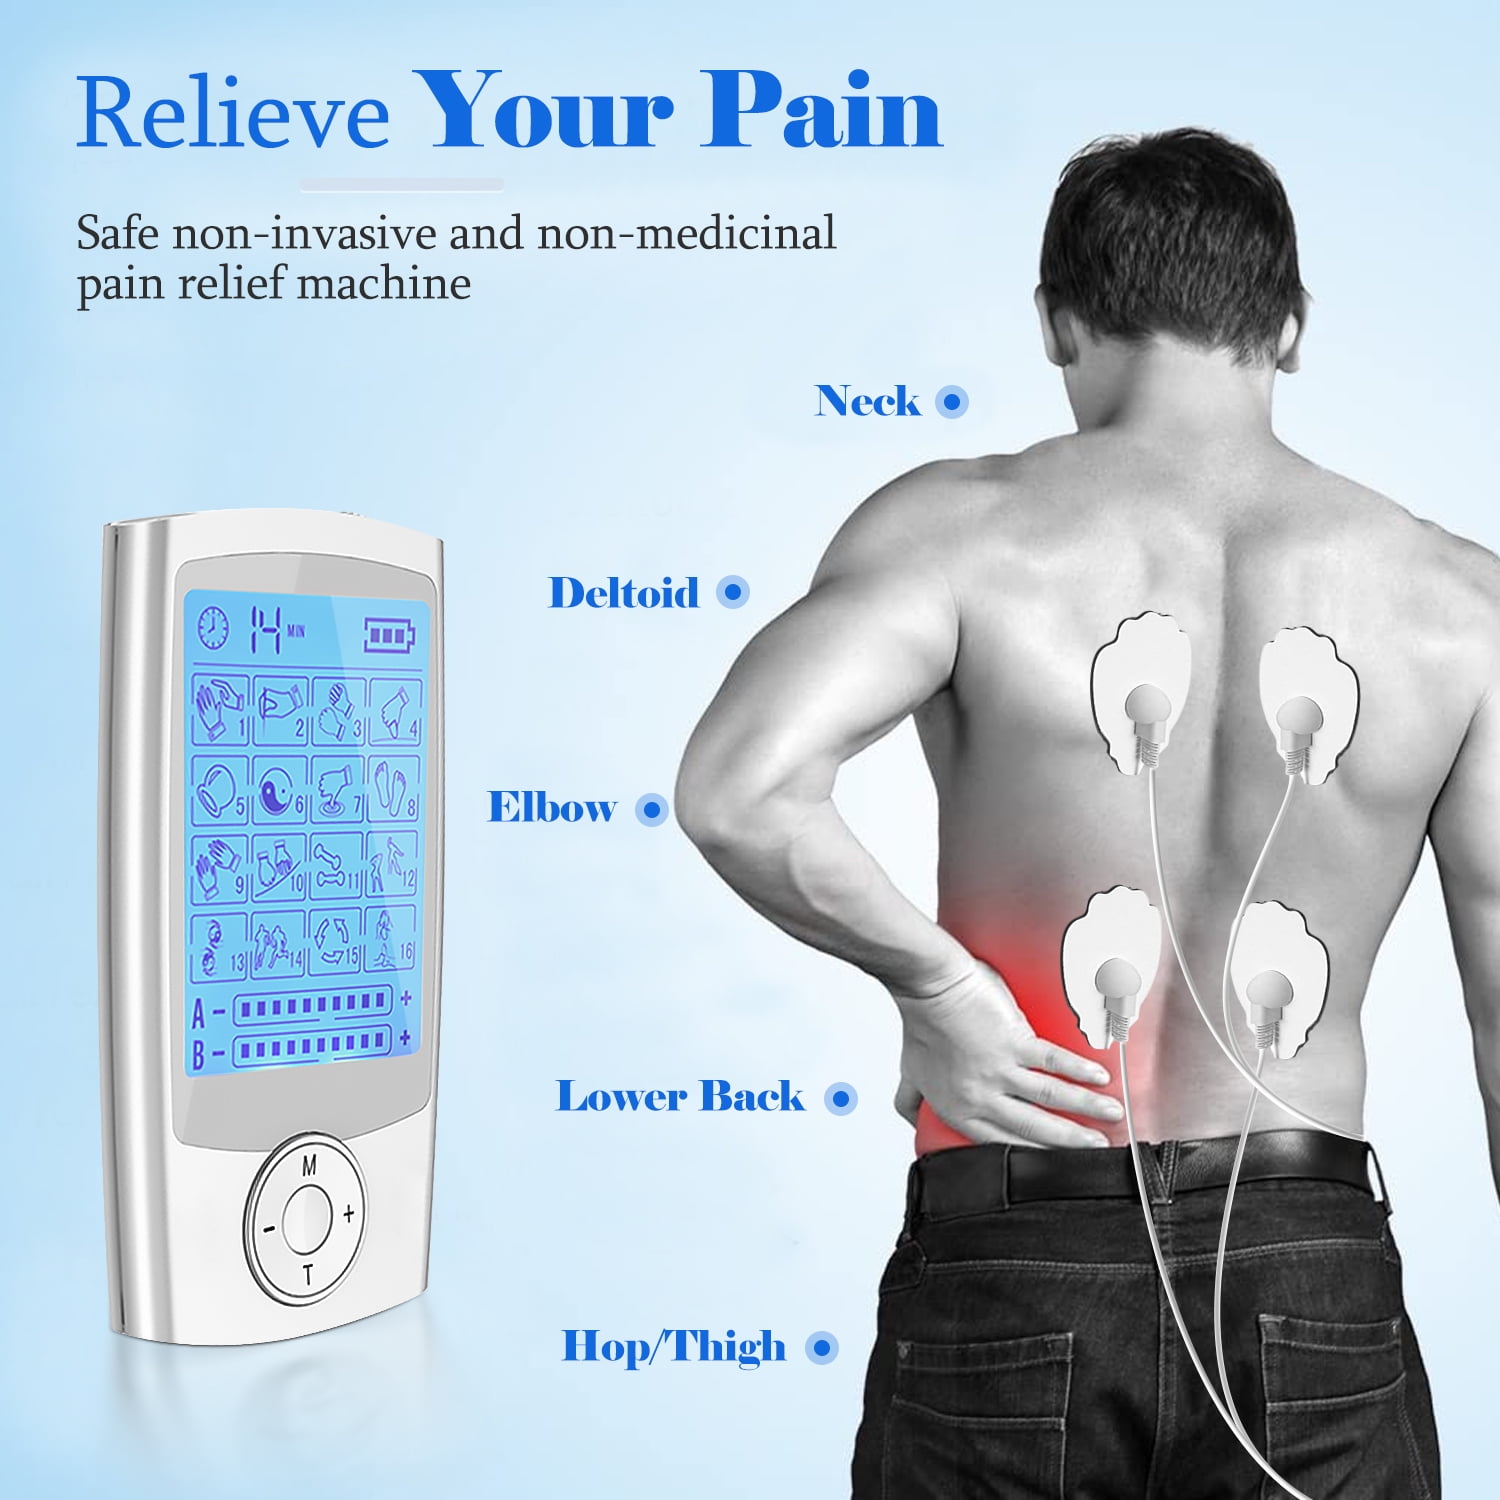 TENS Unit Muscle Stimulator for Pain Relief - Coupon Code CPUC68CQ + 30%  Clip Coupon - Rechargeable TENS EMS Machine of Electric Stimulator Physical  Therapy with 24 Modes, 10 Electrode Pads and